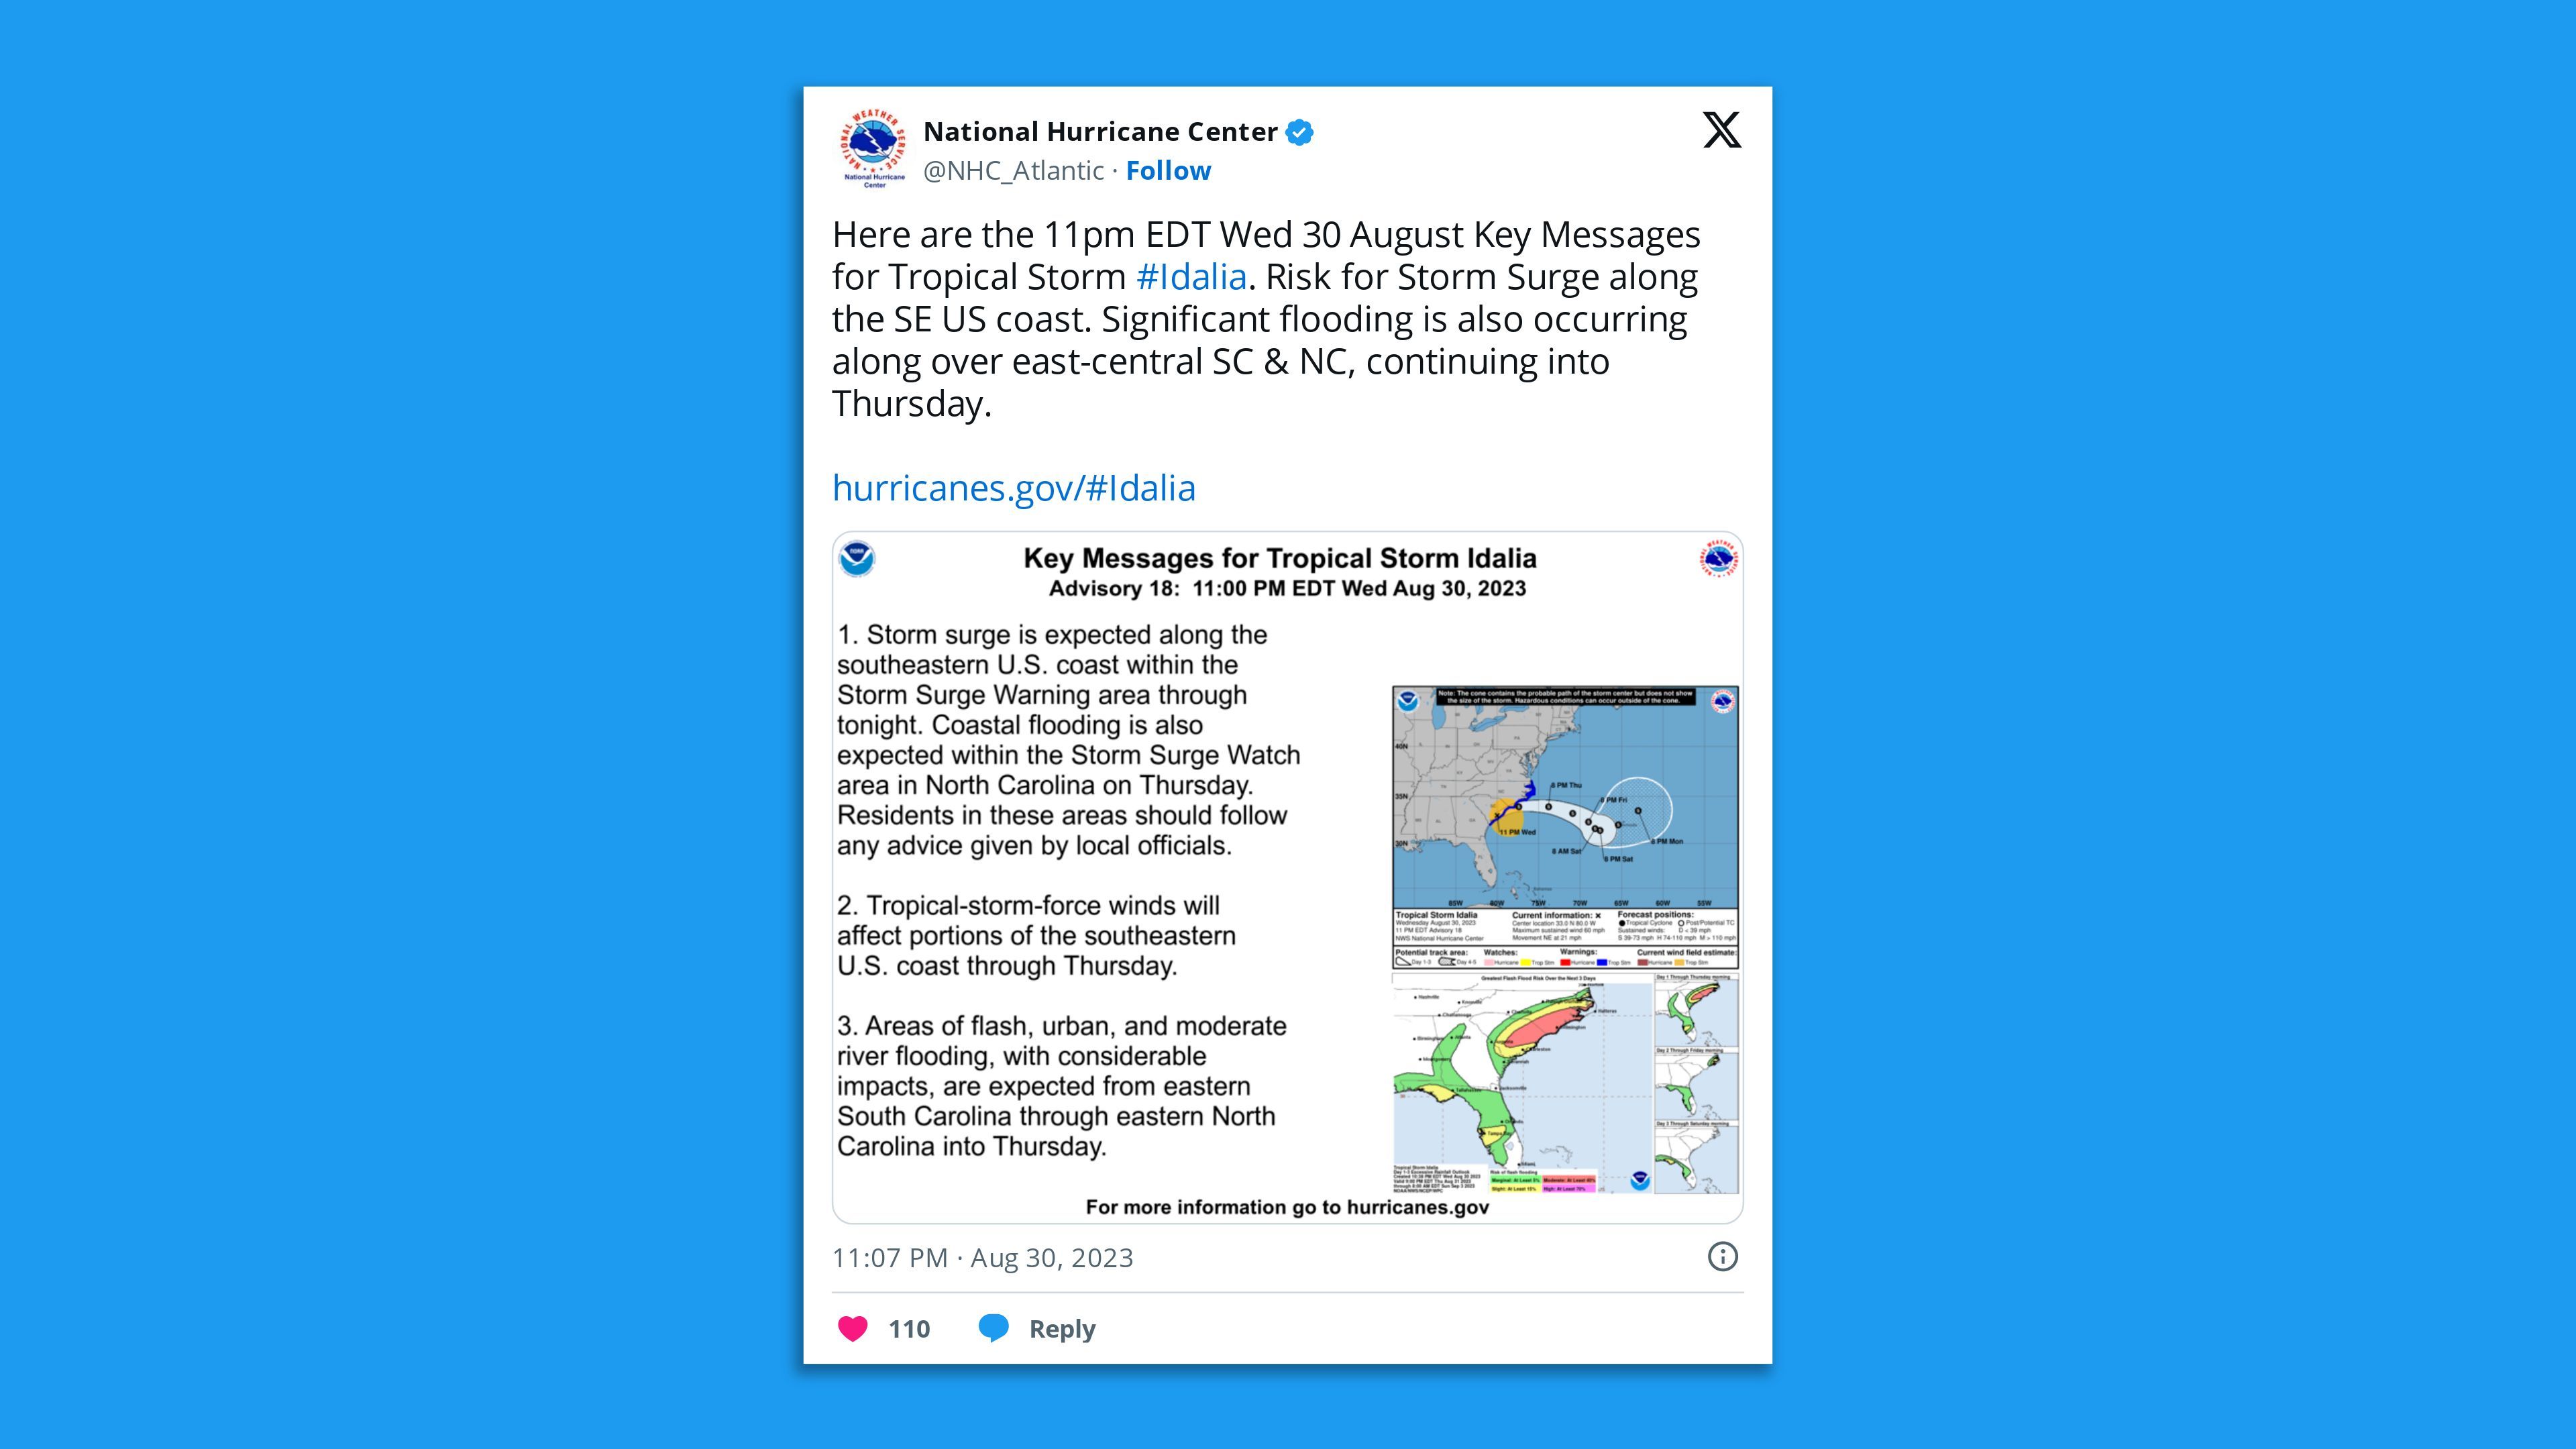 A screenshot of a National Hurricane Center tweet, saying in part: "Here are the 11pm EDT Wed 30 August Key Messages for Tropical Storm #Idalia. Risk for Storm Surge along the SE US coast. Significant flooding is also occurring along over east-central SC & NC, continuing into Thursday."